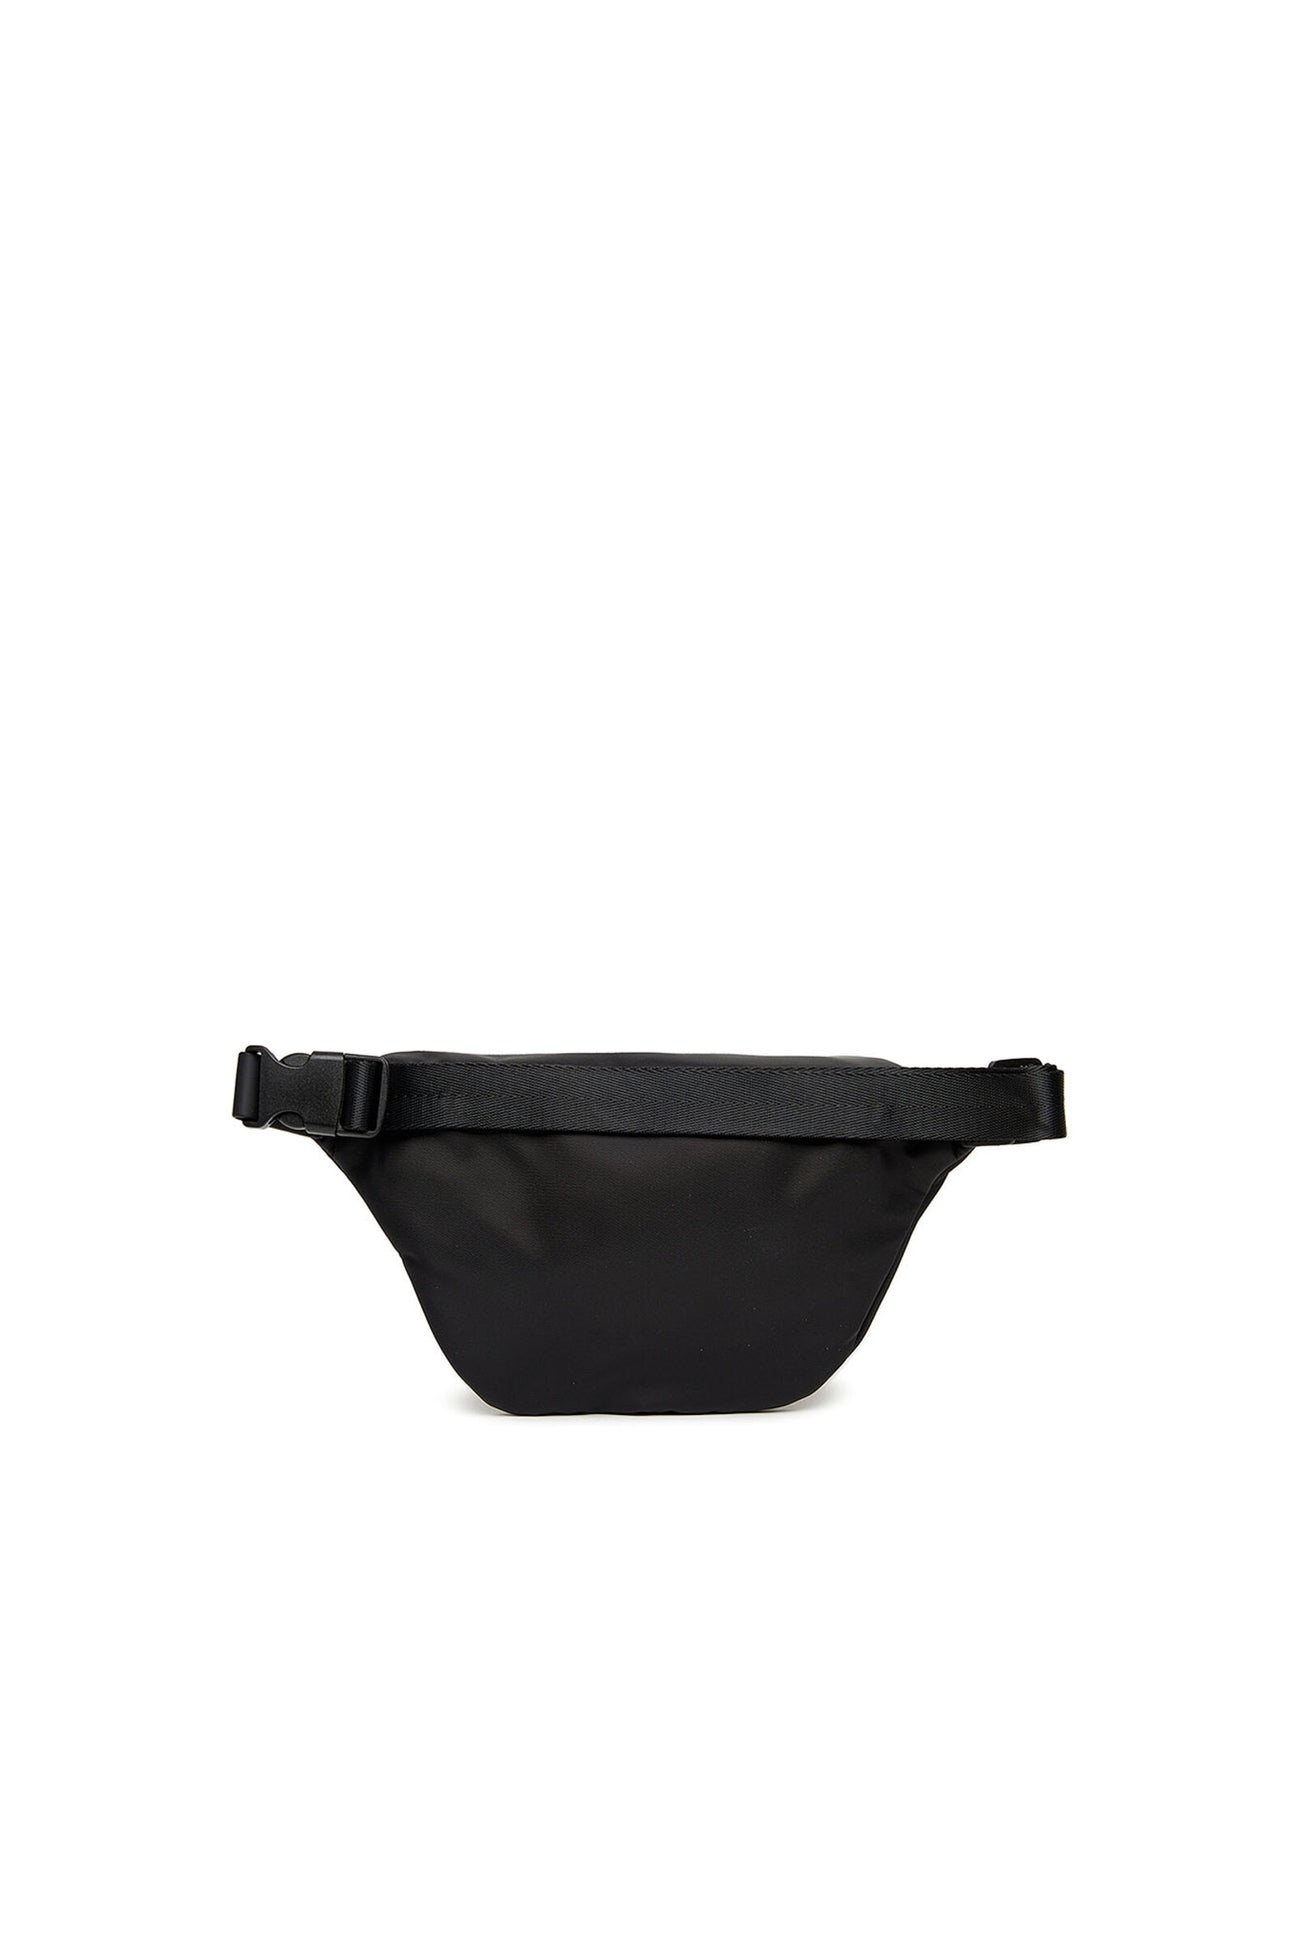 Black fanny pack with logo Black fanny pack with logo